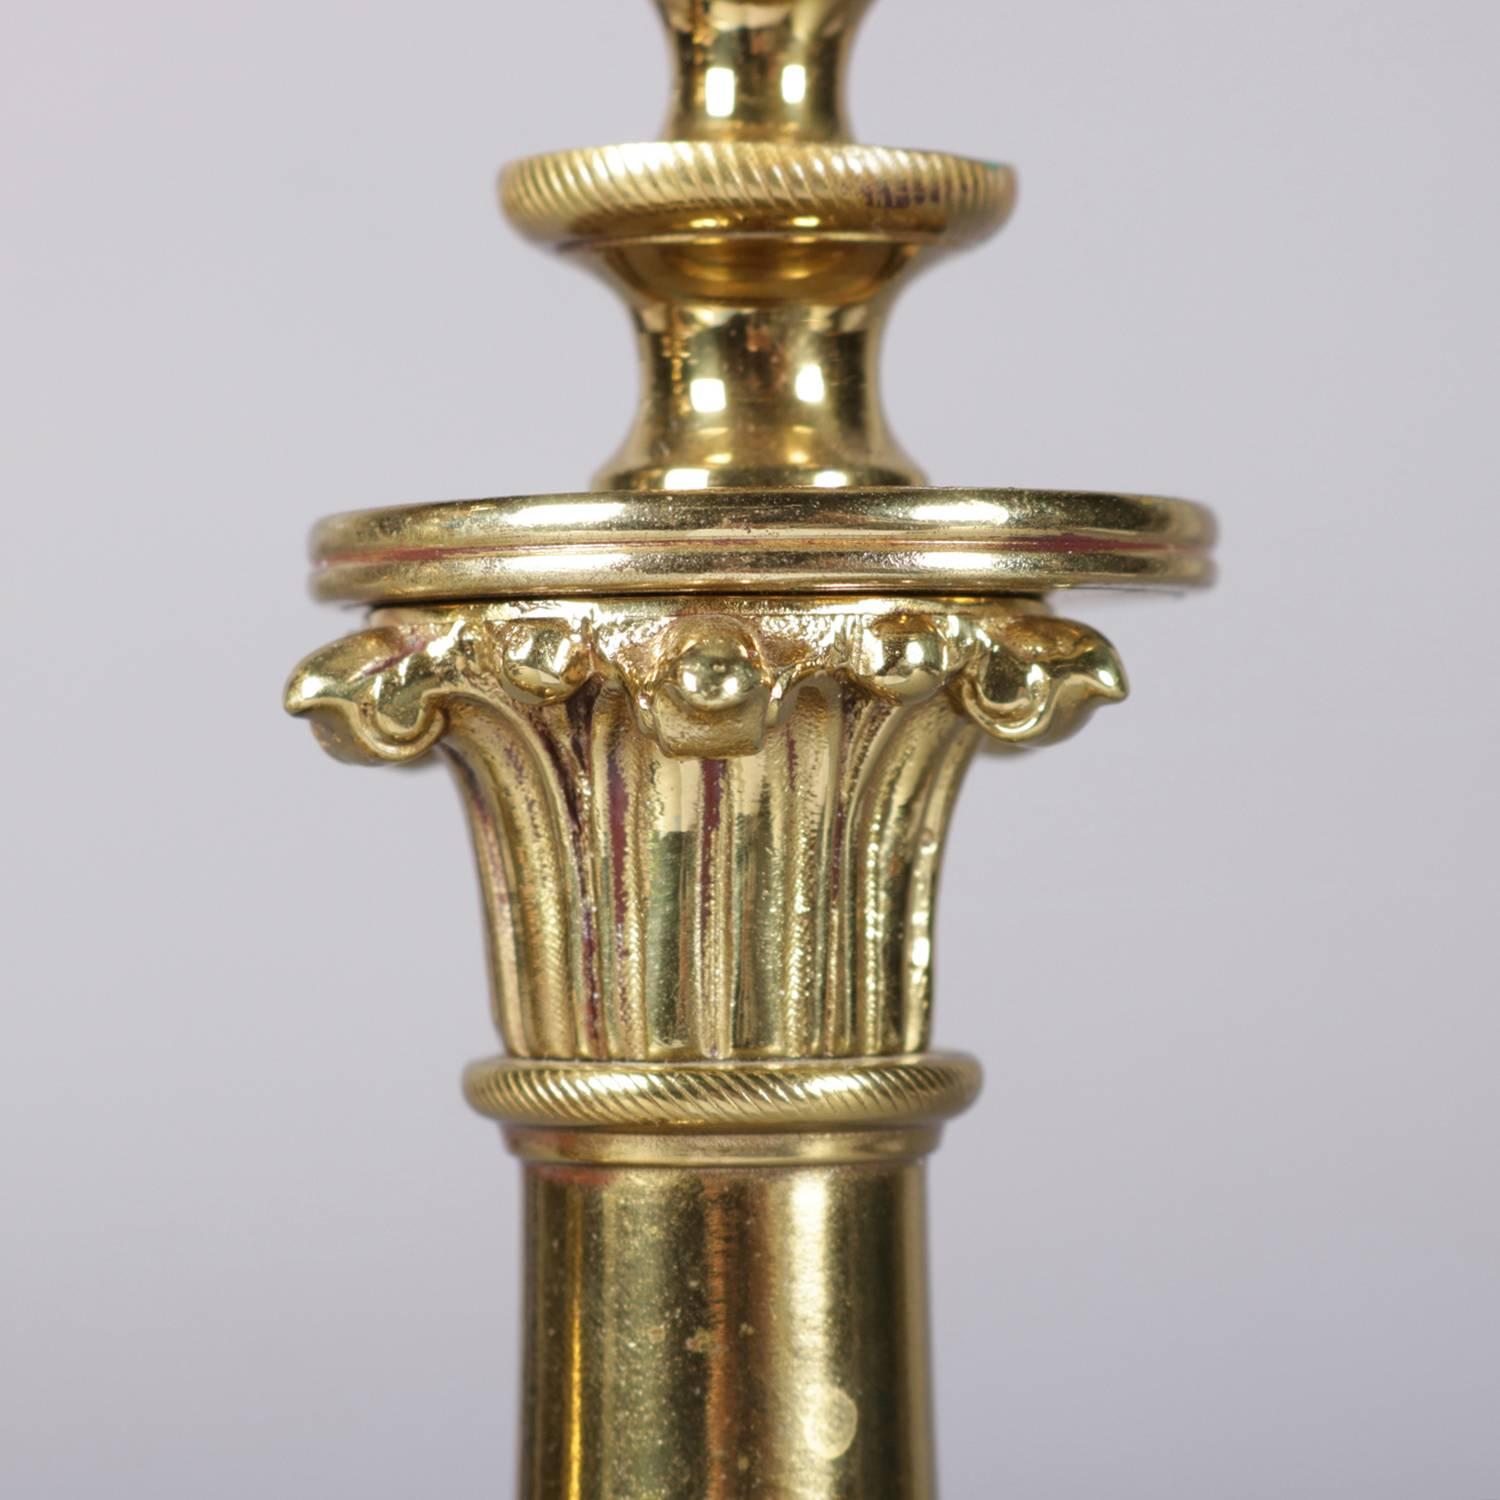 Pair of French Louis XIV style gilt candlesticks feature Corinthian column-form capitals above shaped shaft with beaded lower, supported on tripod scroll and foliate base, 19th century

Measure: 11